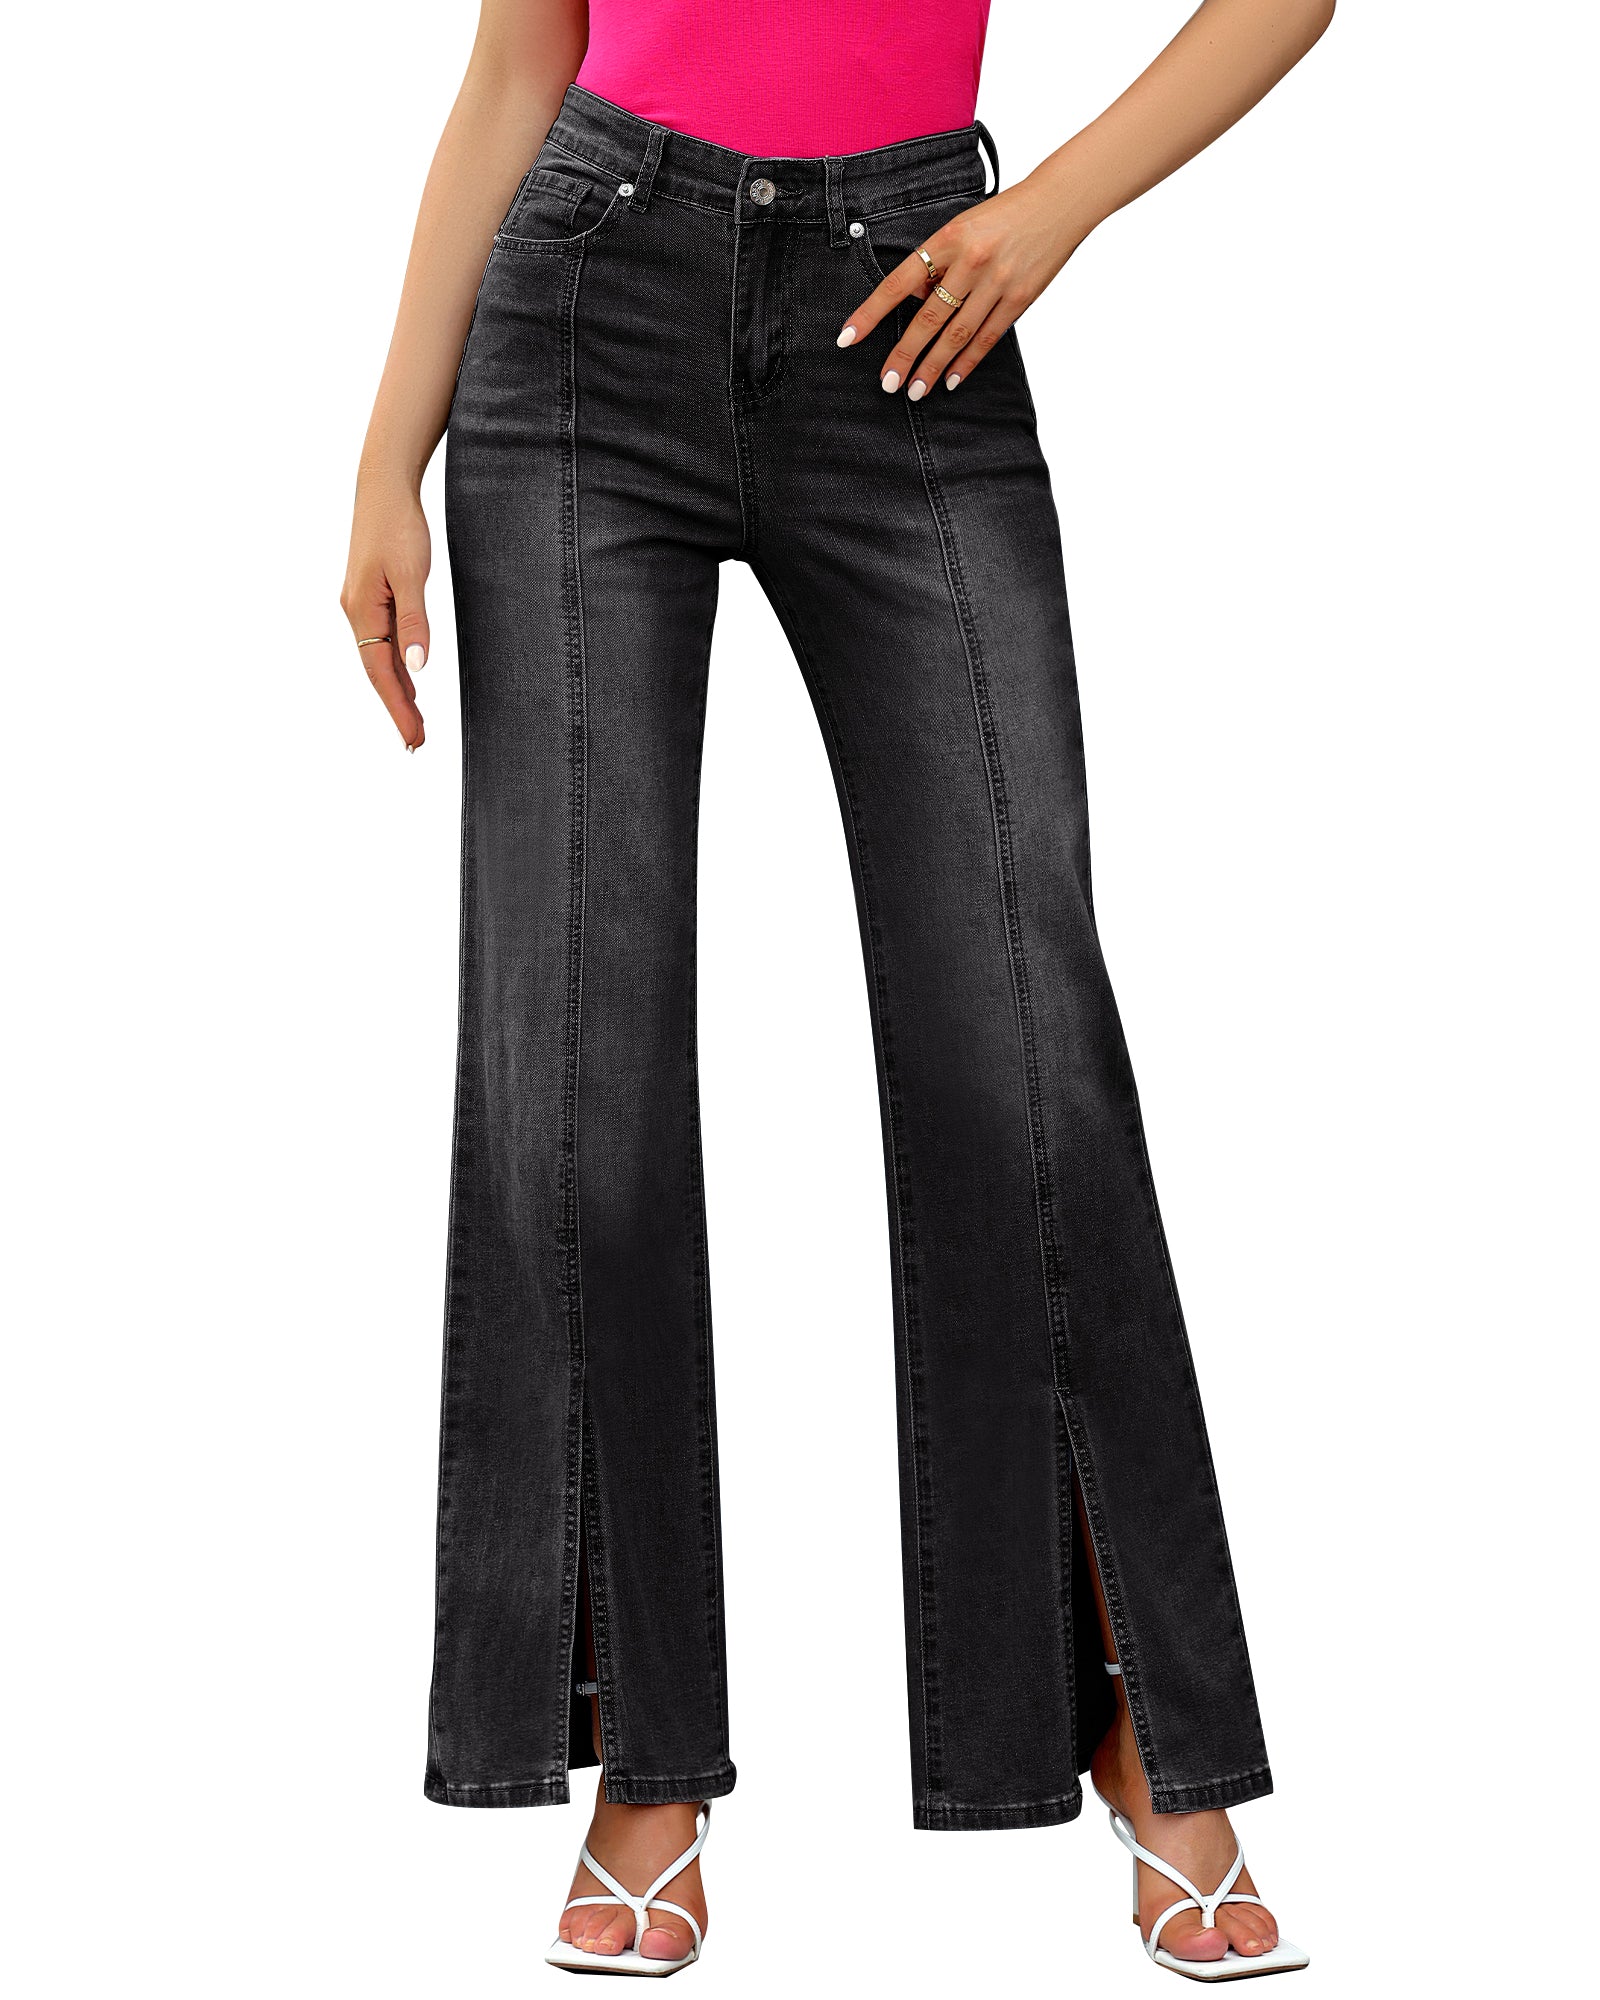 GRAPENT Jeans for Women High Waist Stretchy High Waisted Cropped